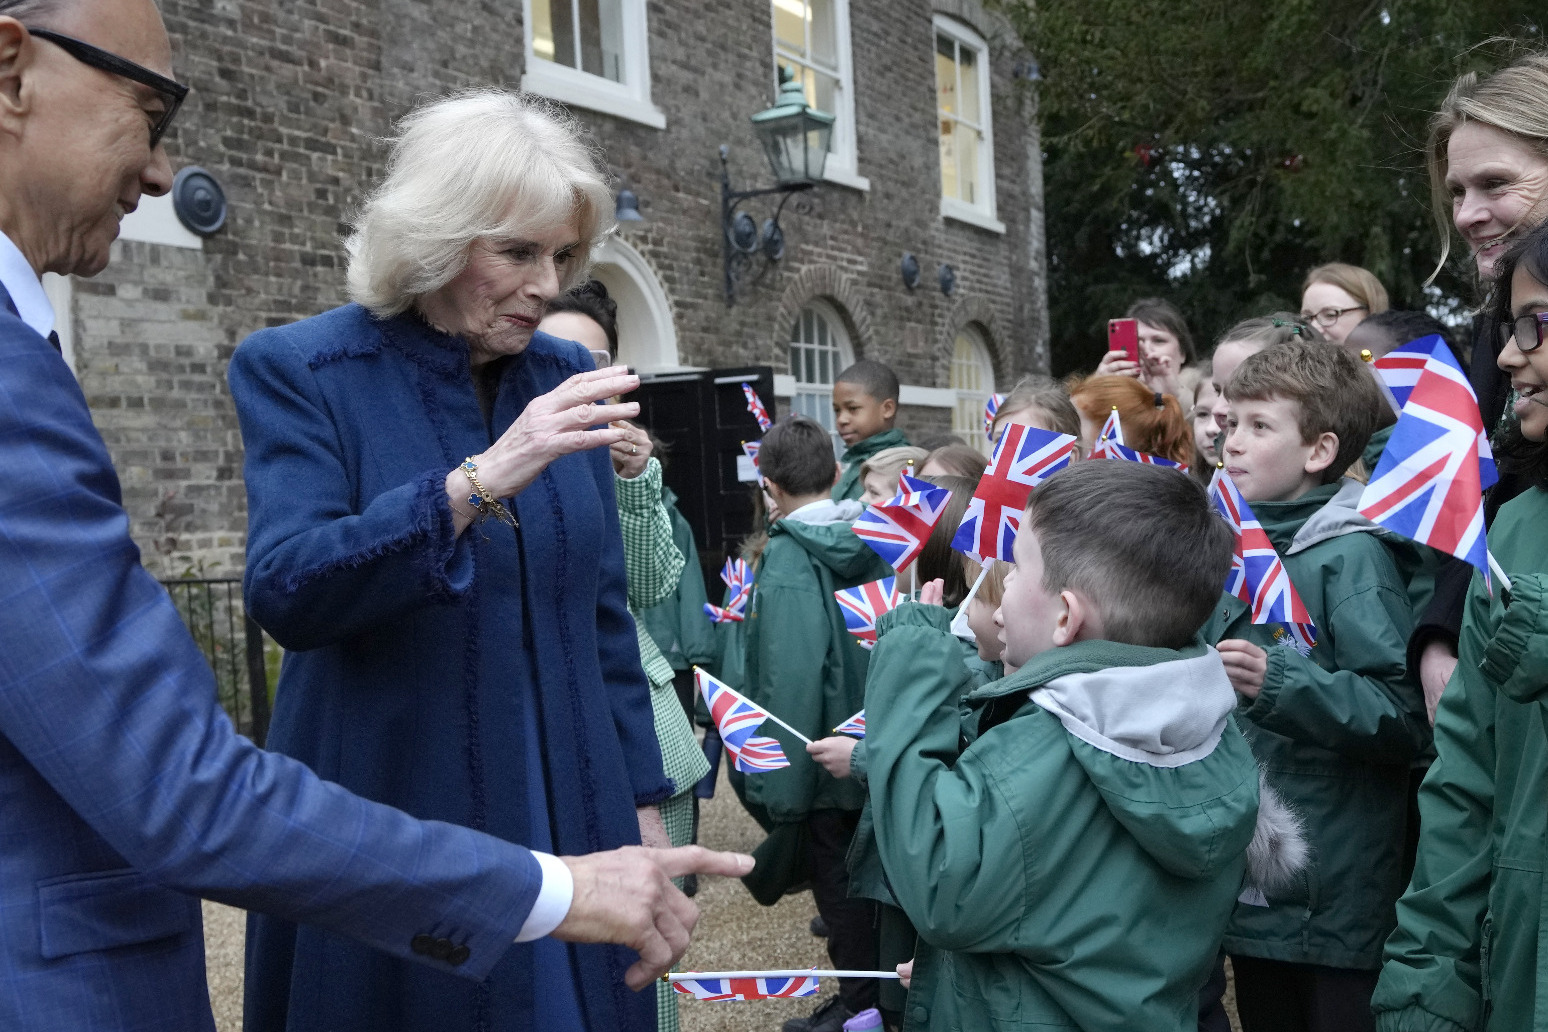 Camilla makes first public appearance since recovering from Covid 